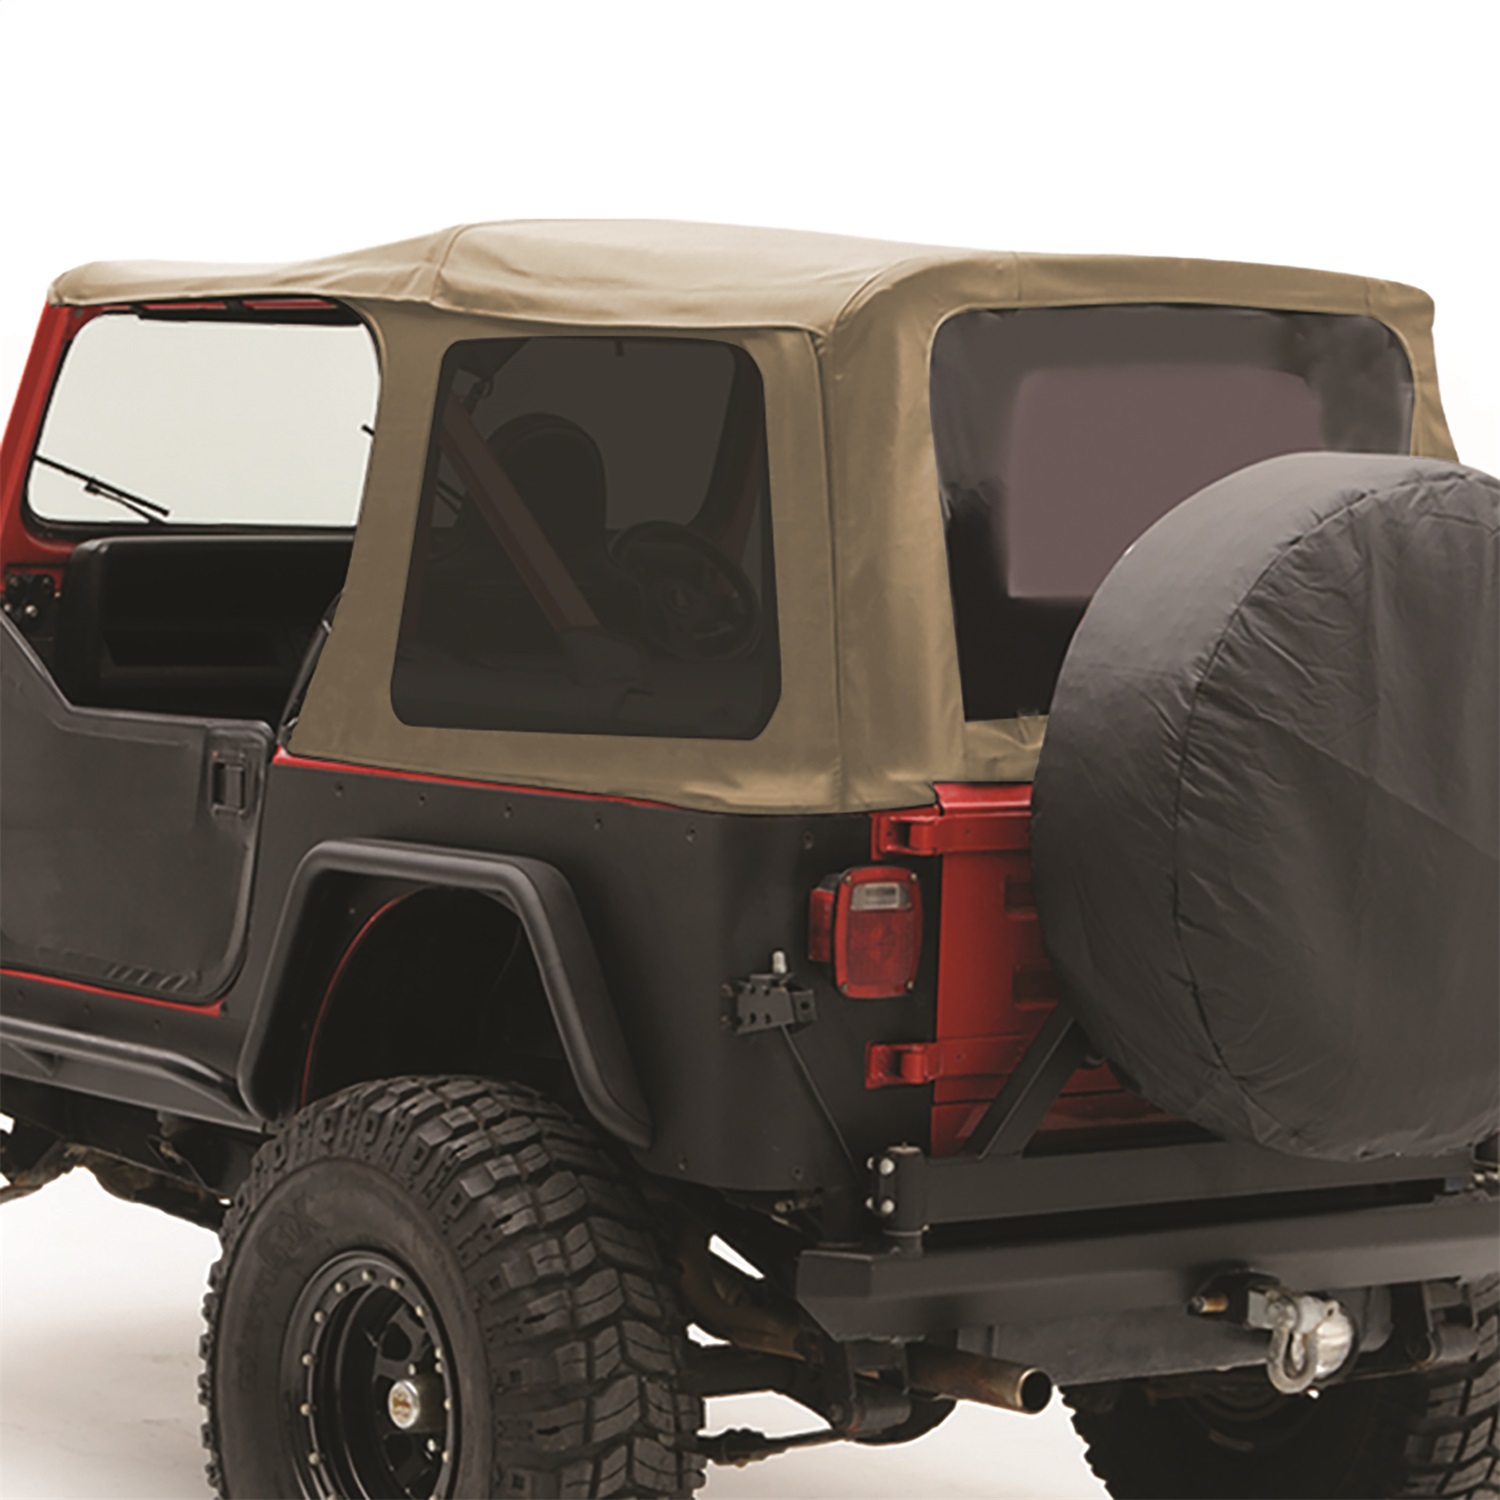 Smittybilt 9870217 Replacement Soft Top Fits 87-95 Wrangler (YJ)